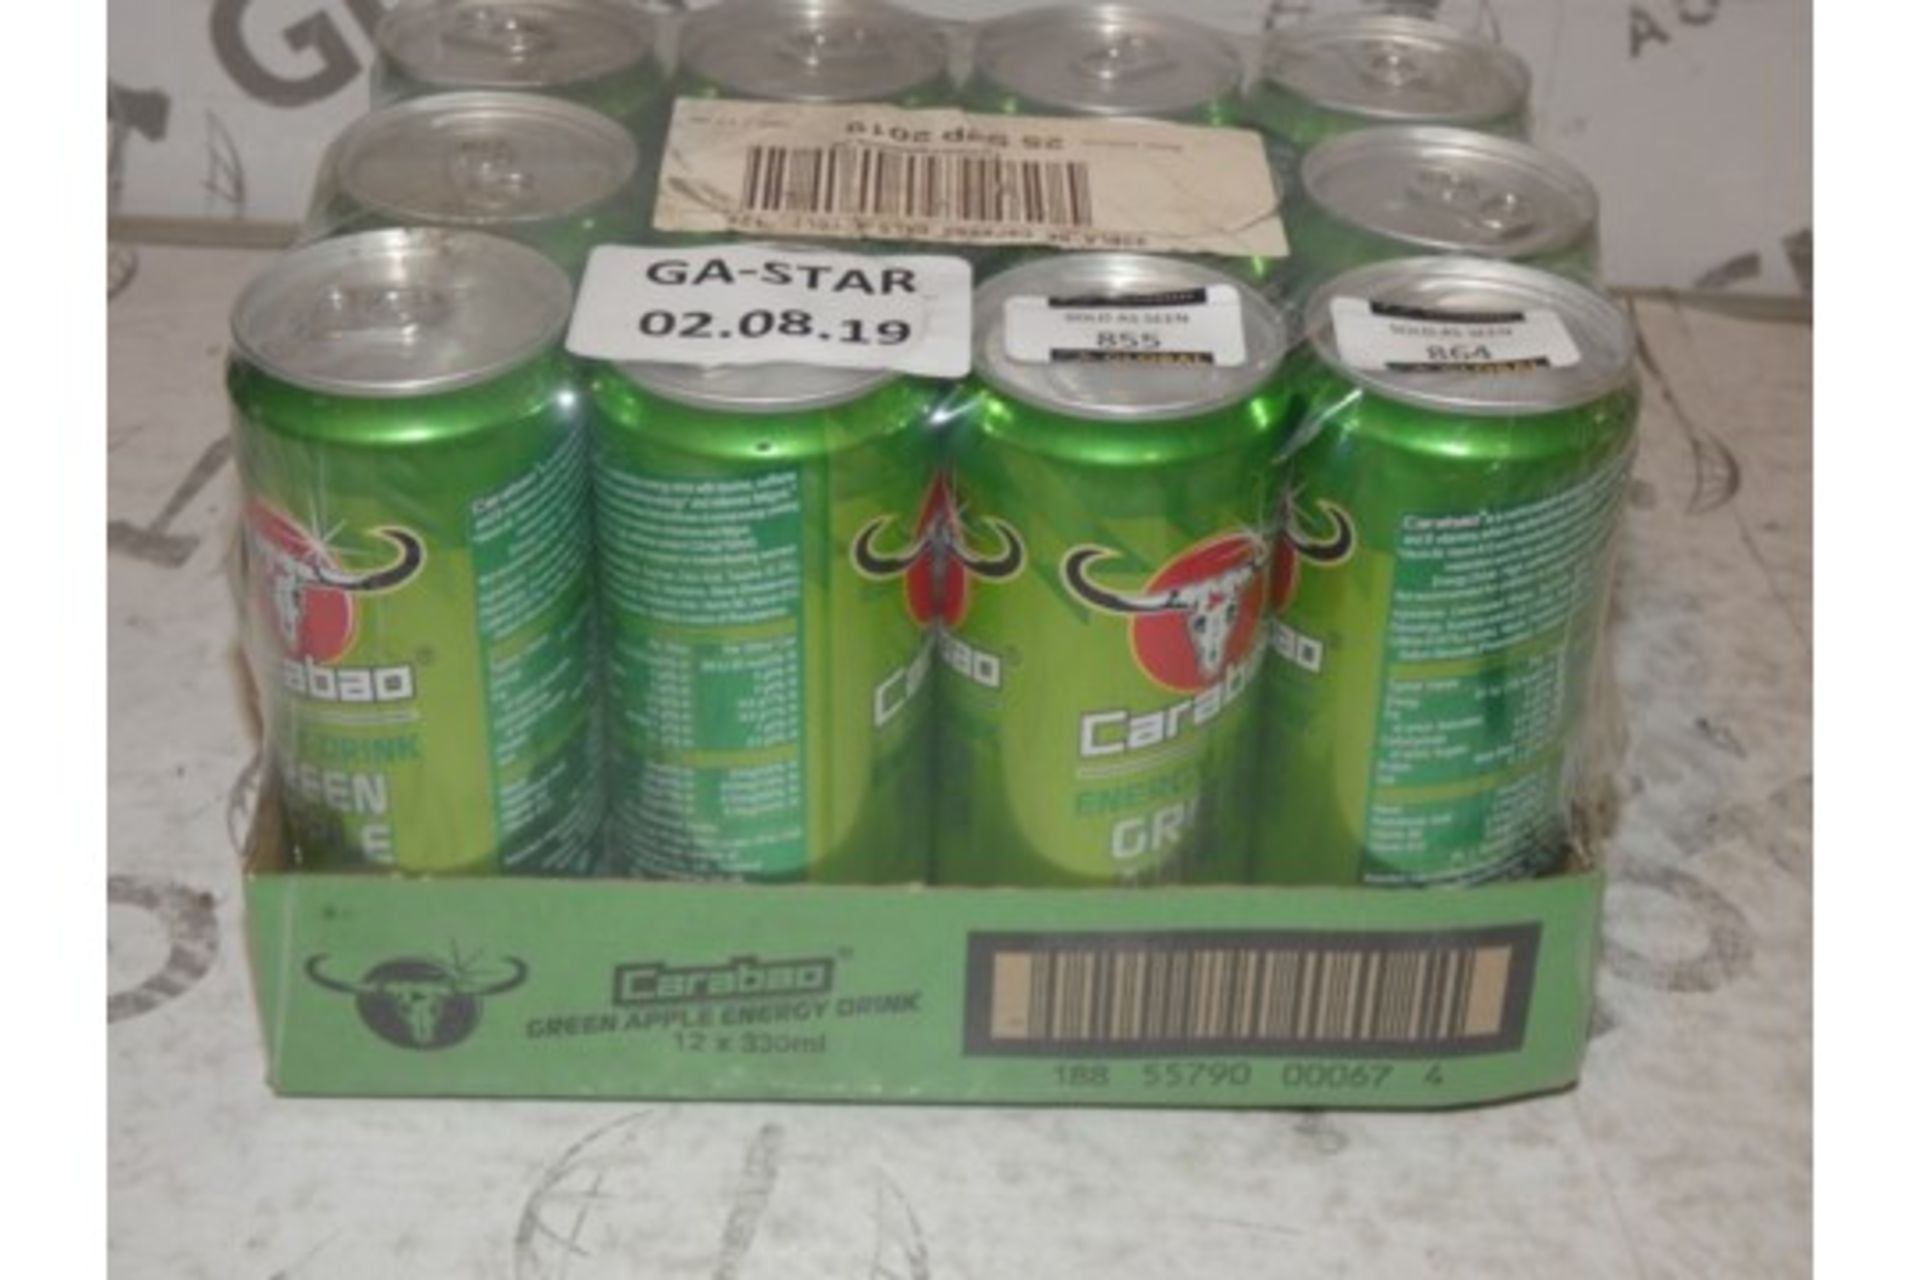 Lot To Contain 4 Crates Each Containing 12 Carabao Energy Drink Green Apple Cans Combined RRP £50 (